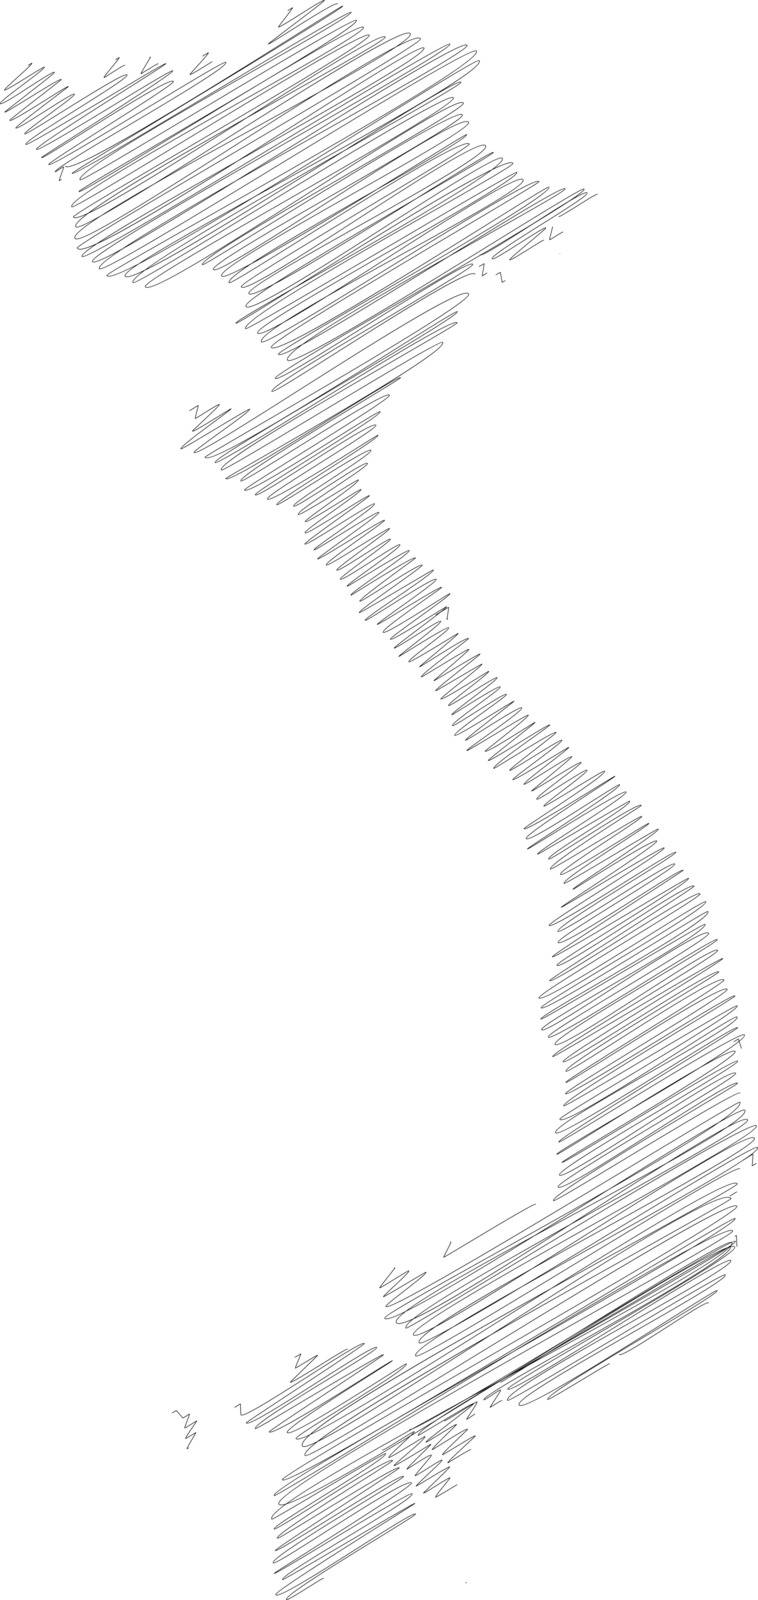 Vietnam - pencil scribble sketch silhouette map of country area with dropped shadow. Simple flat vector illustration.